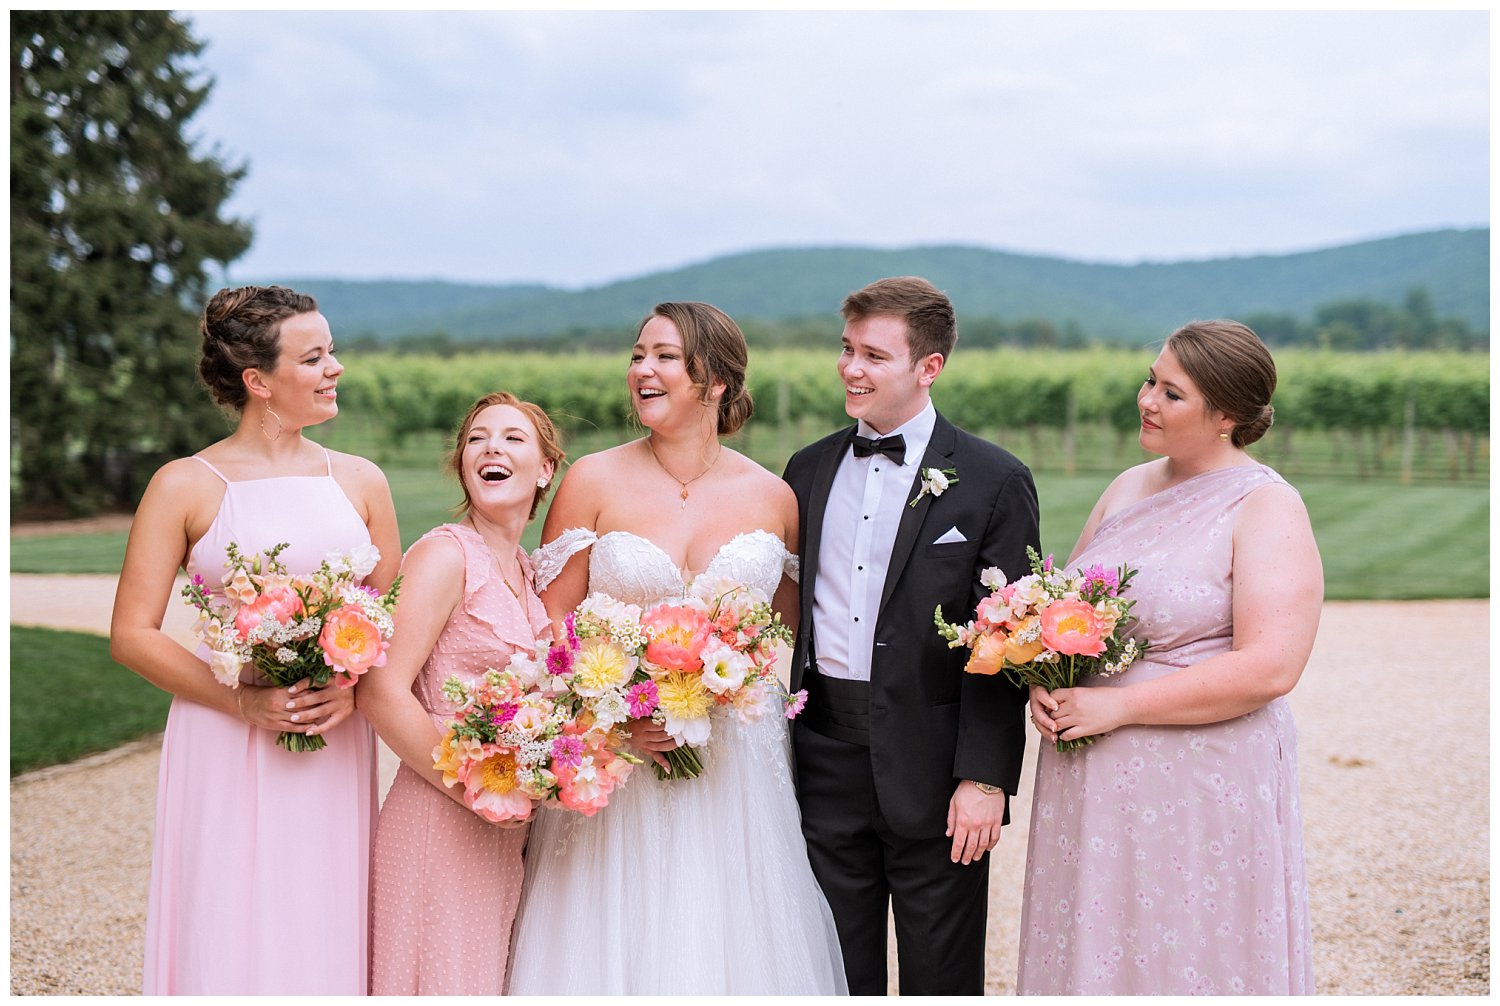 Colorful summer bridal bouquets with shades of peak, orange, and peach